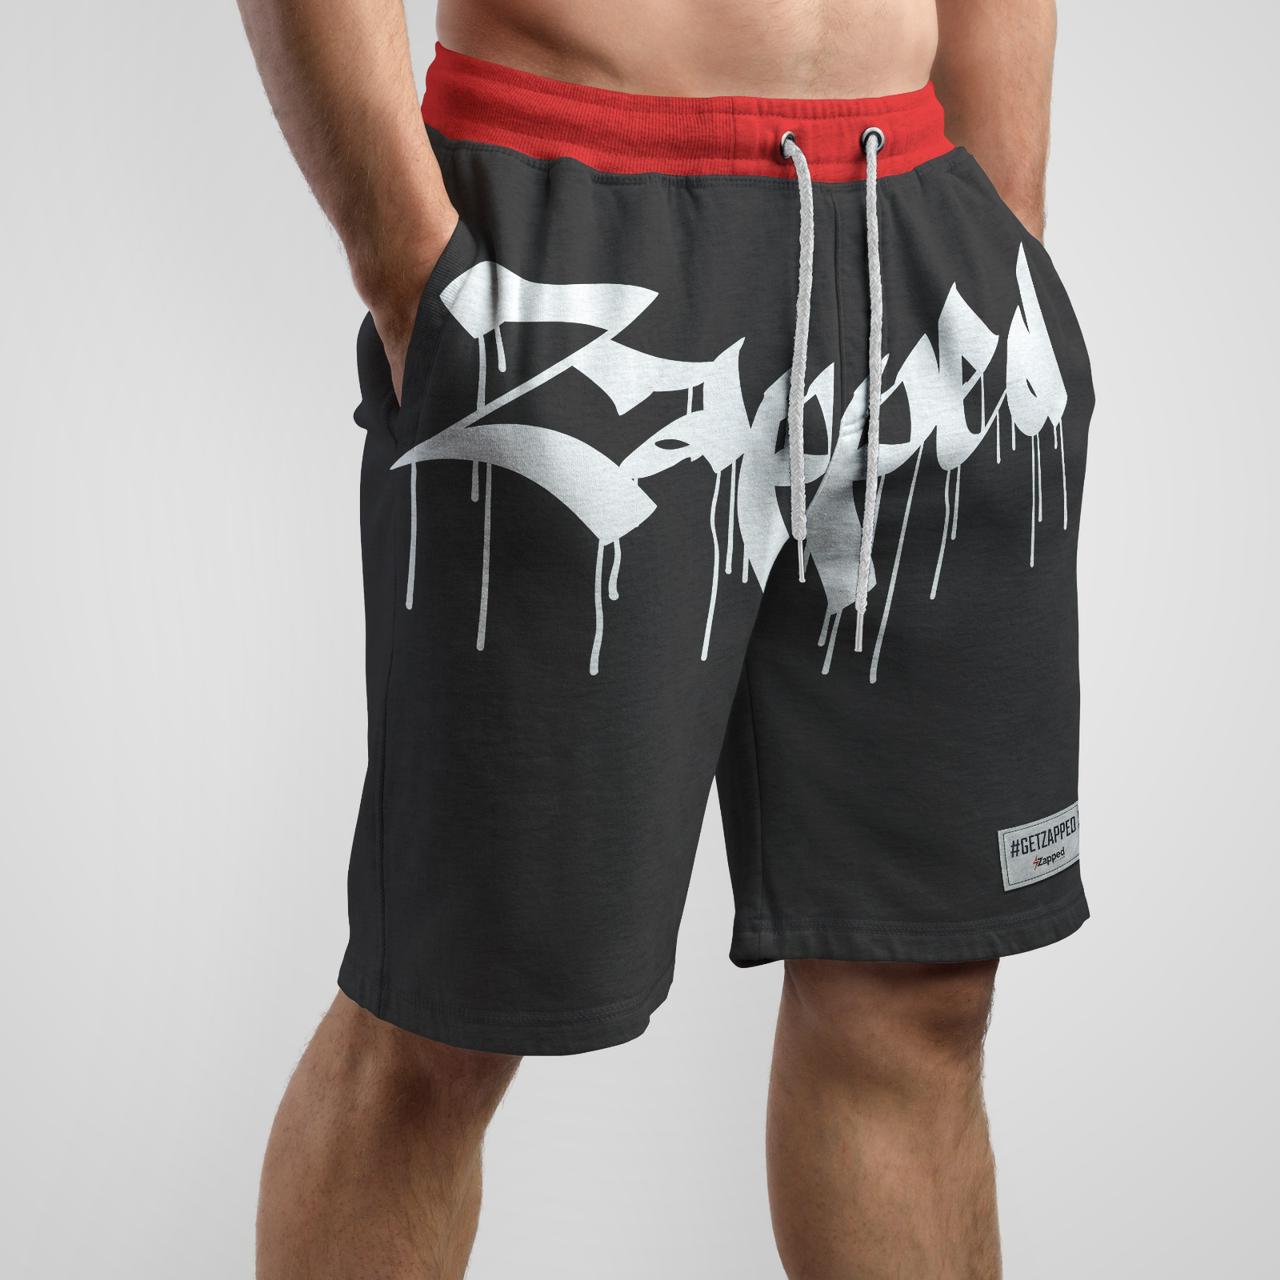 Zapped Black & Red Cotton Shorts Style 2